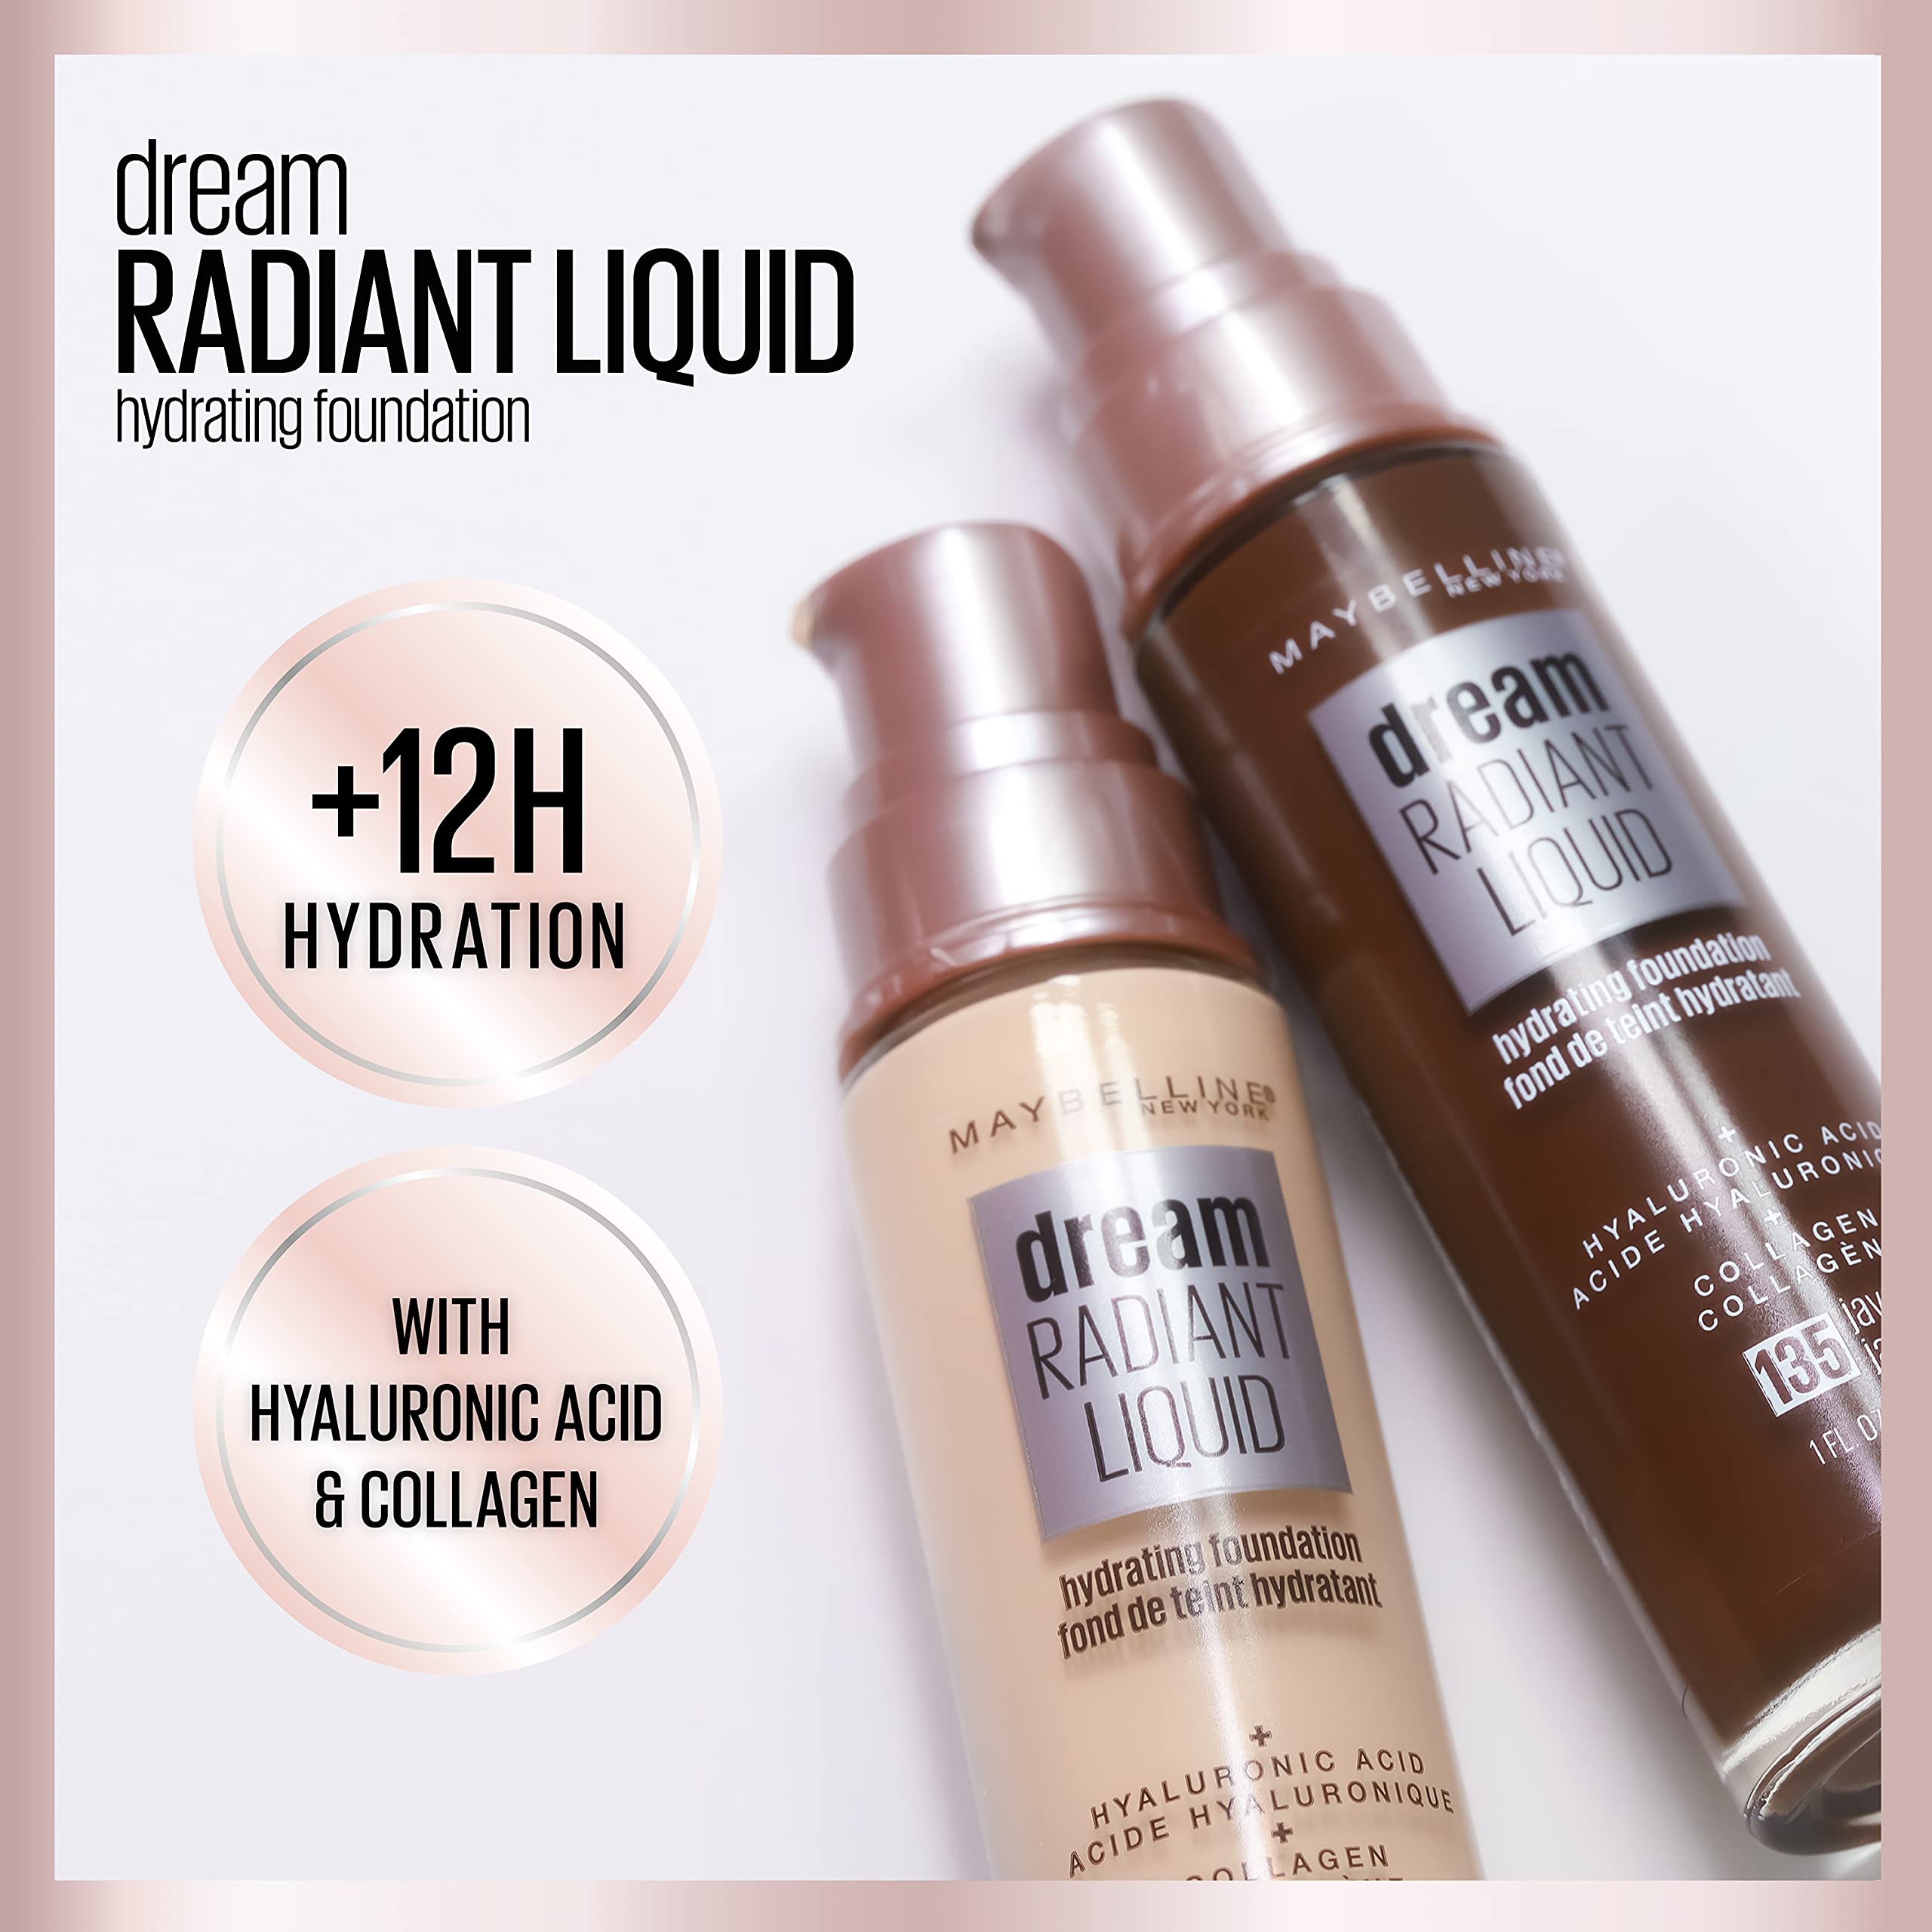 Maybelline New York Radiant liquid medium coverage hydrating makeup, lightweight liquid foundation, formulated with hyaluronic acid and collagen for a radiant look, Sandy Beige, 1 Fl Oz